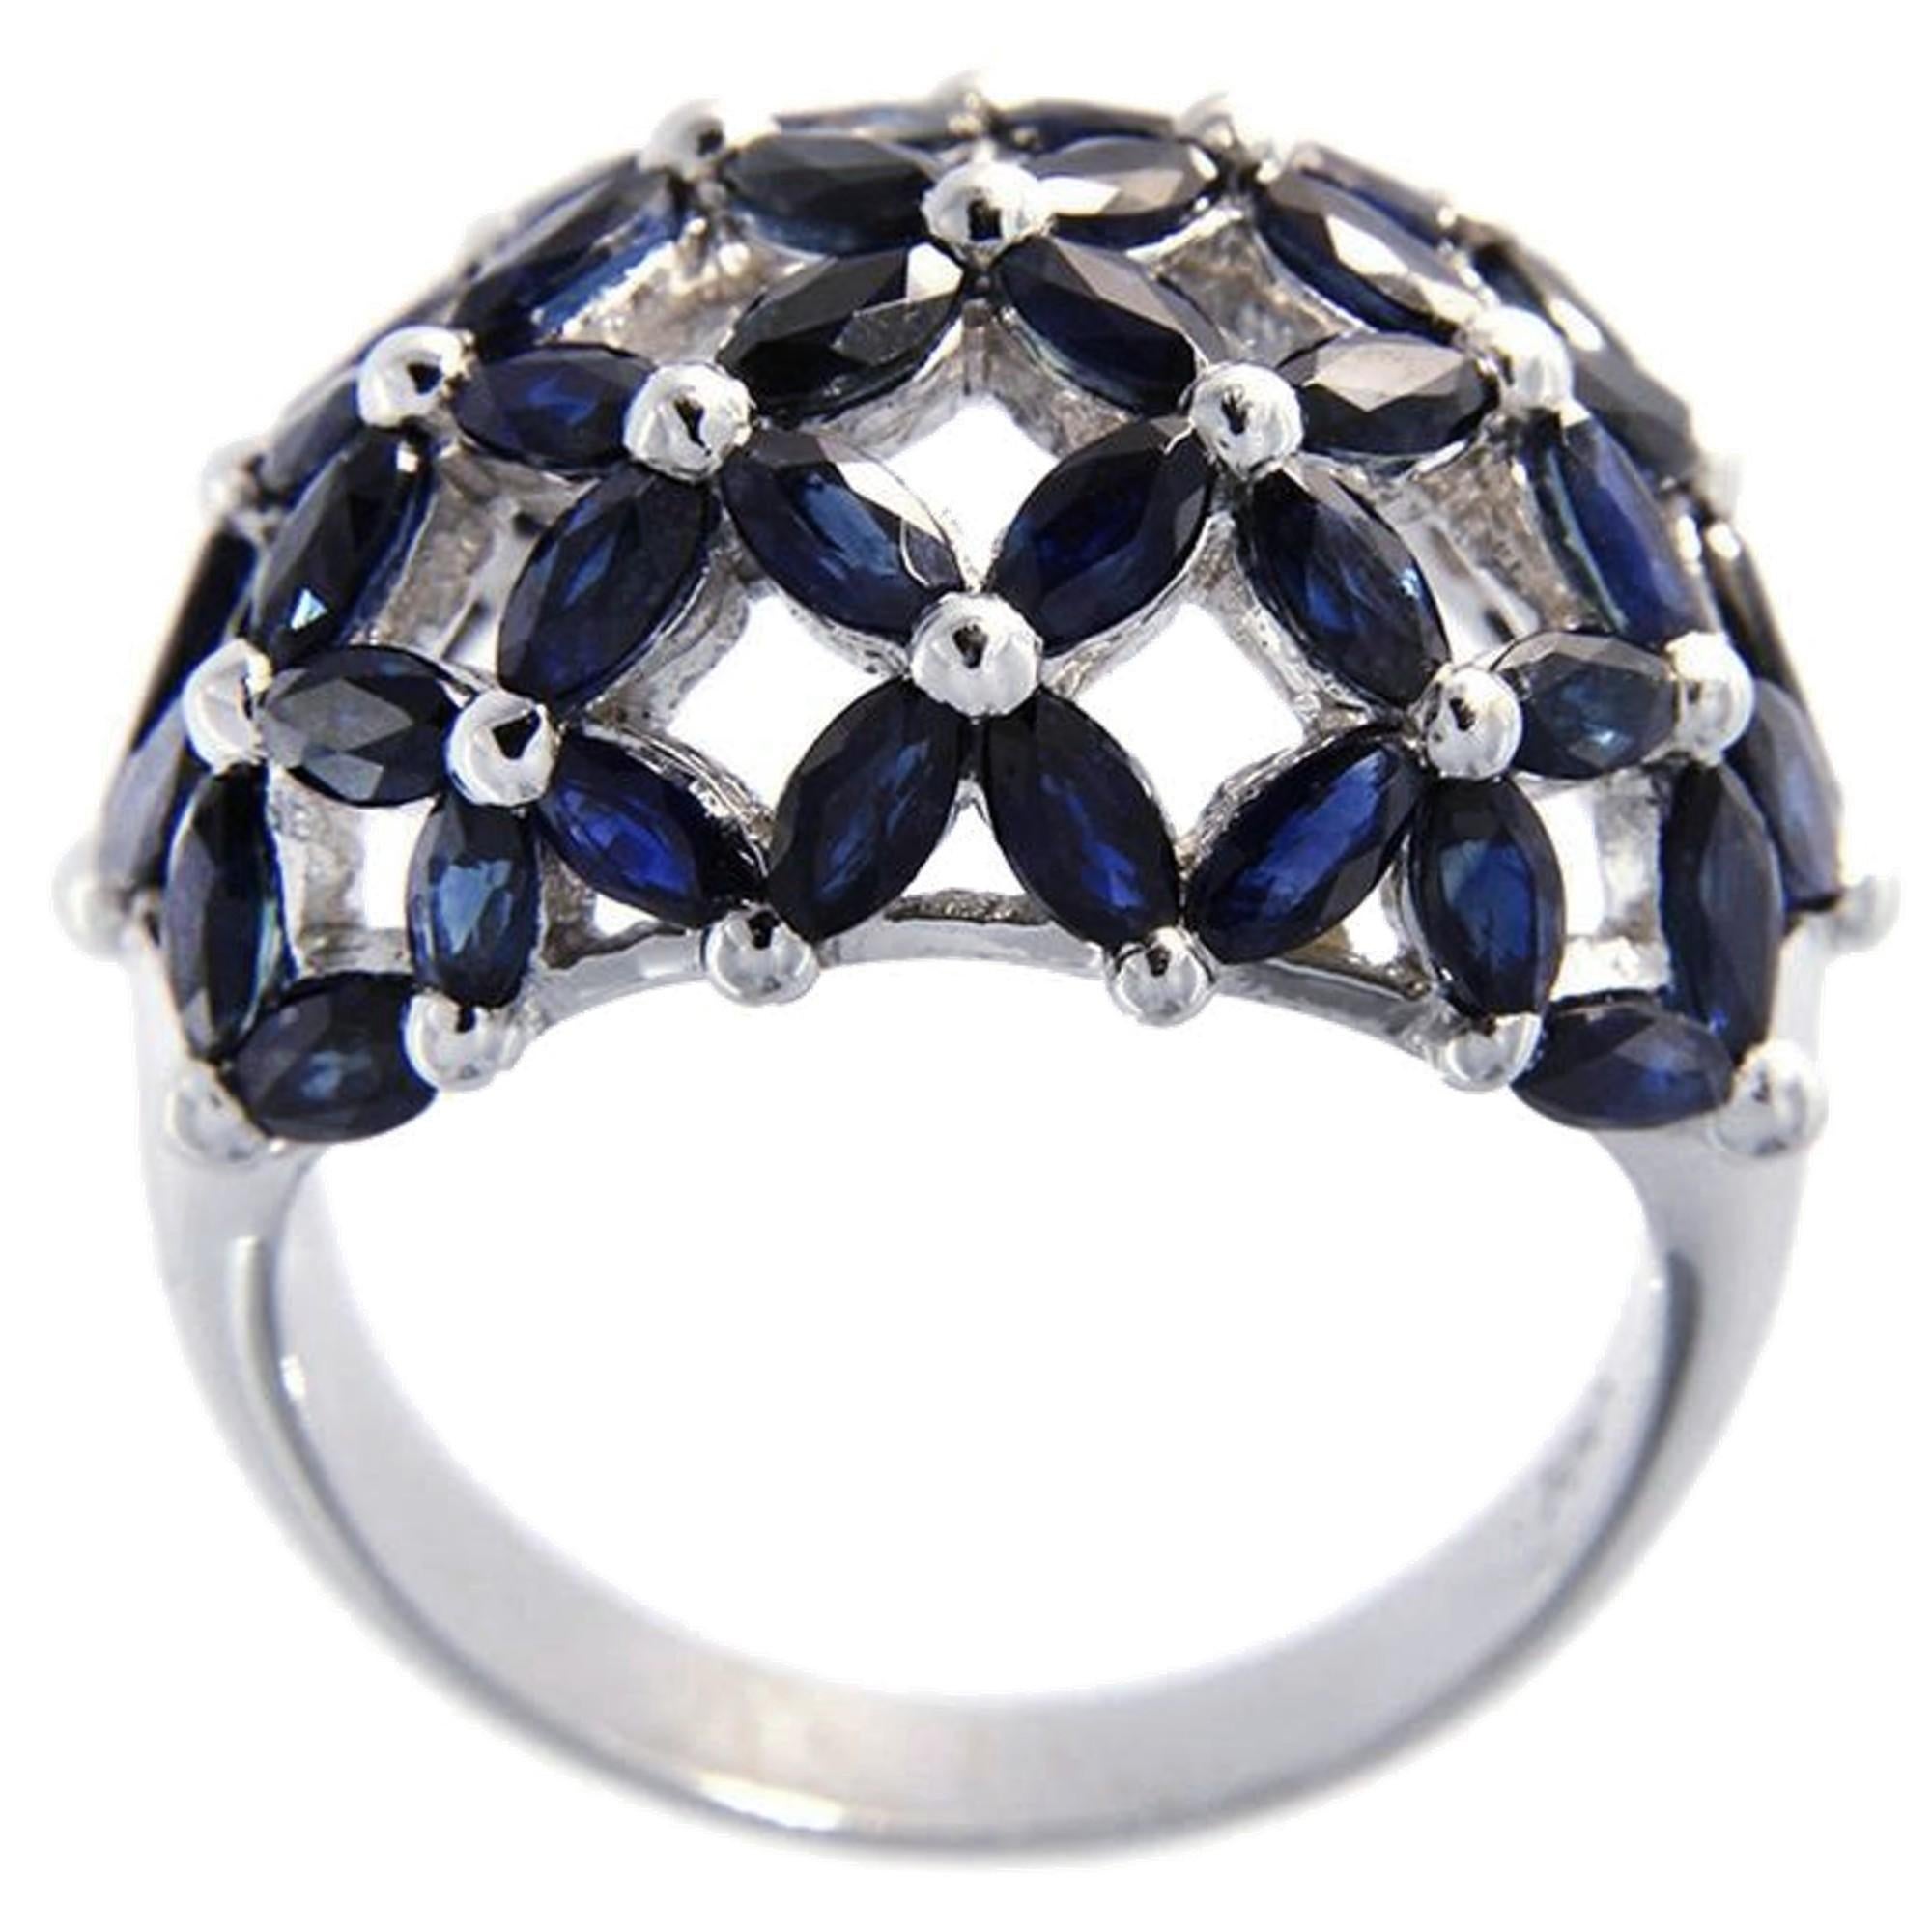 Alex Jona design collection, hand crafted in Italy, 18 karat white gold dome ring, set with 5.28 carats of blue sapphires.  Size US 6.5, can be sized to any specification. 

Alex Jona jewels stand out, not only for their special design and for the